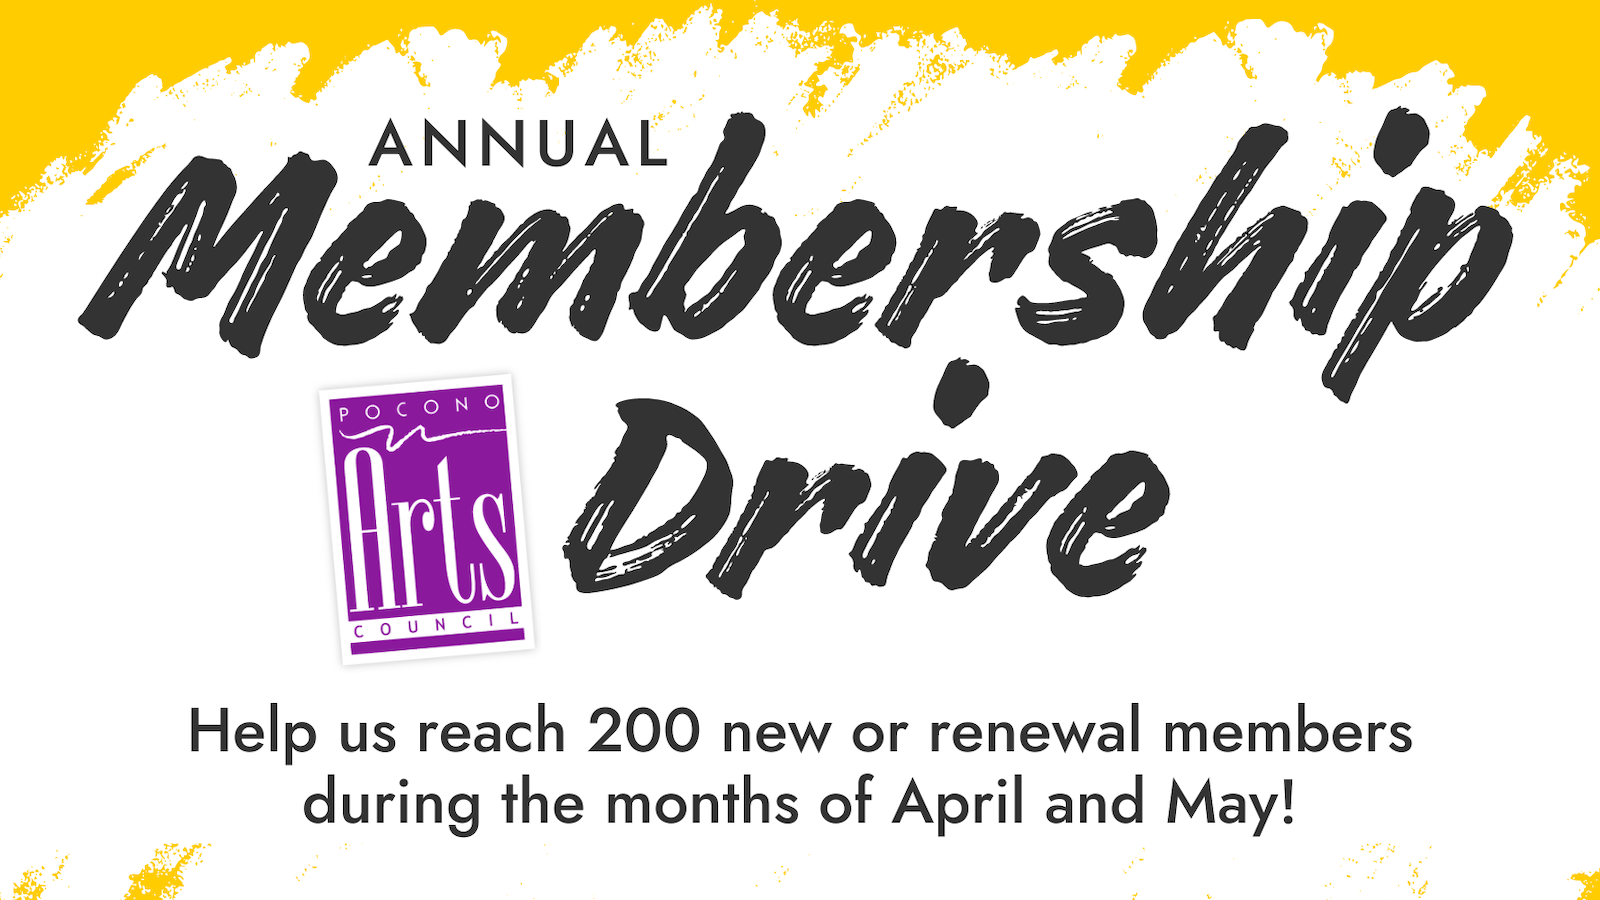 Annual Membership Drive - Help us reach 200 new or renewal members during the months of April and May!